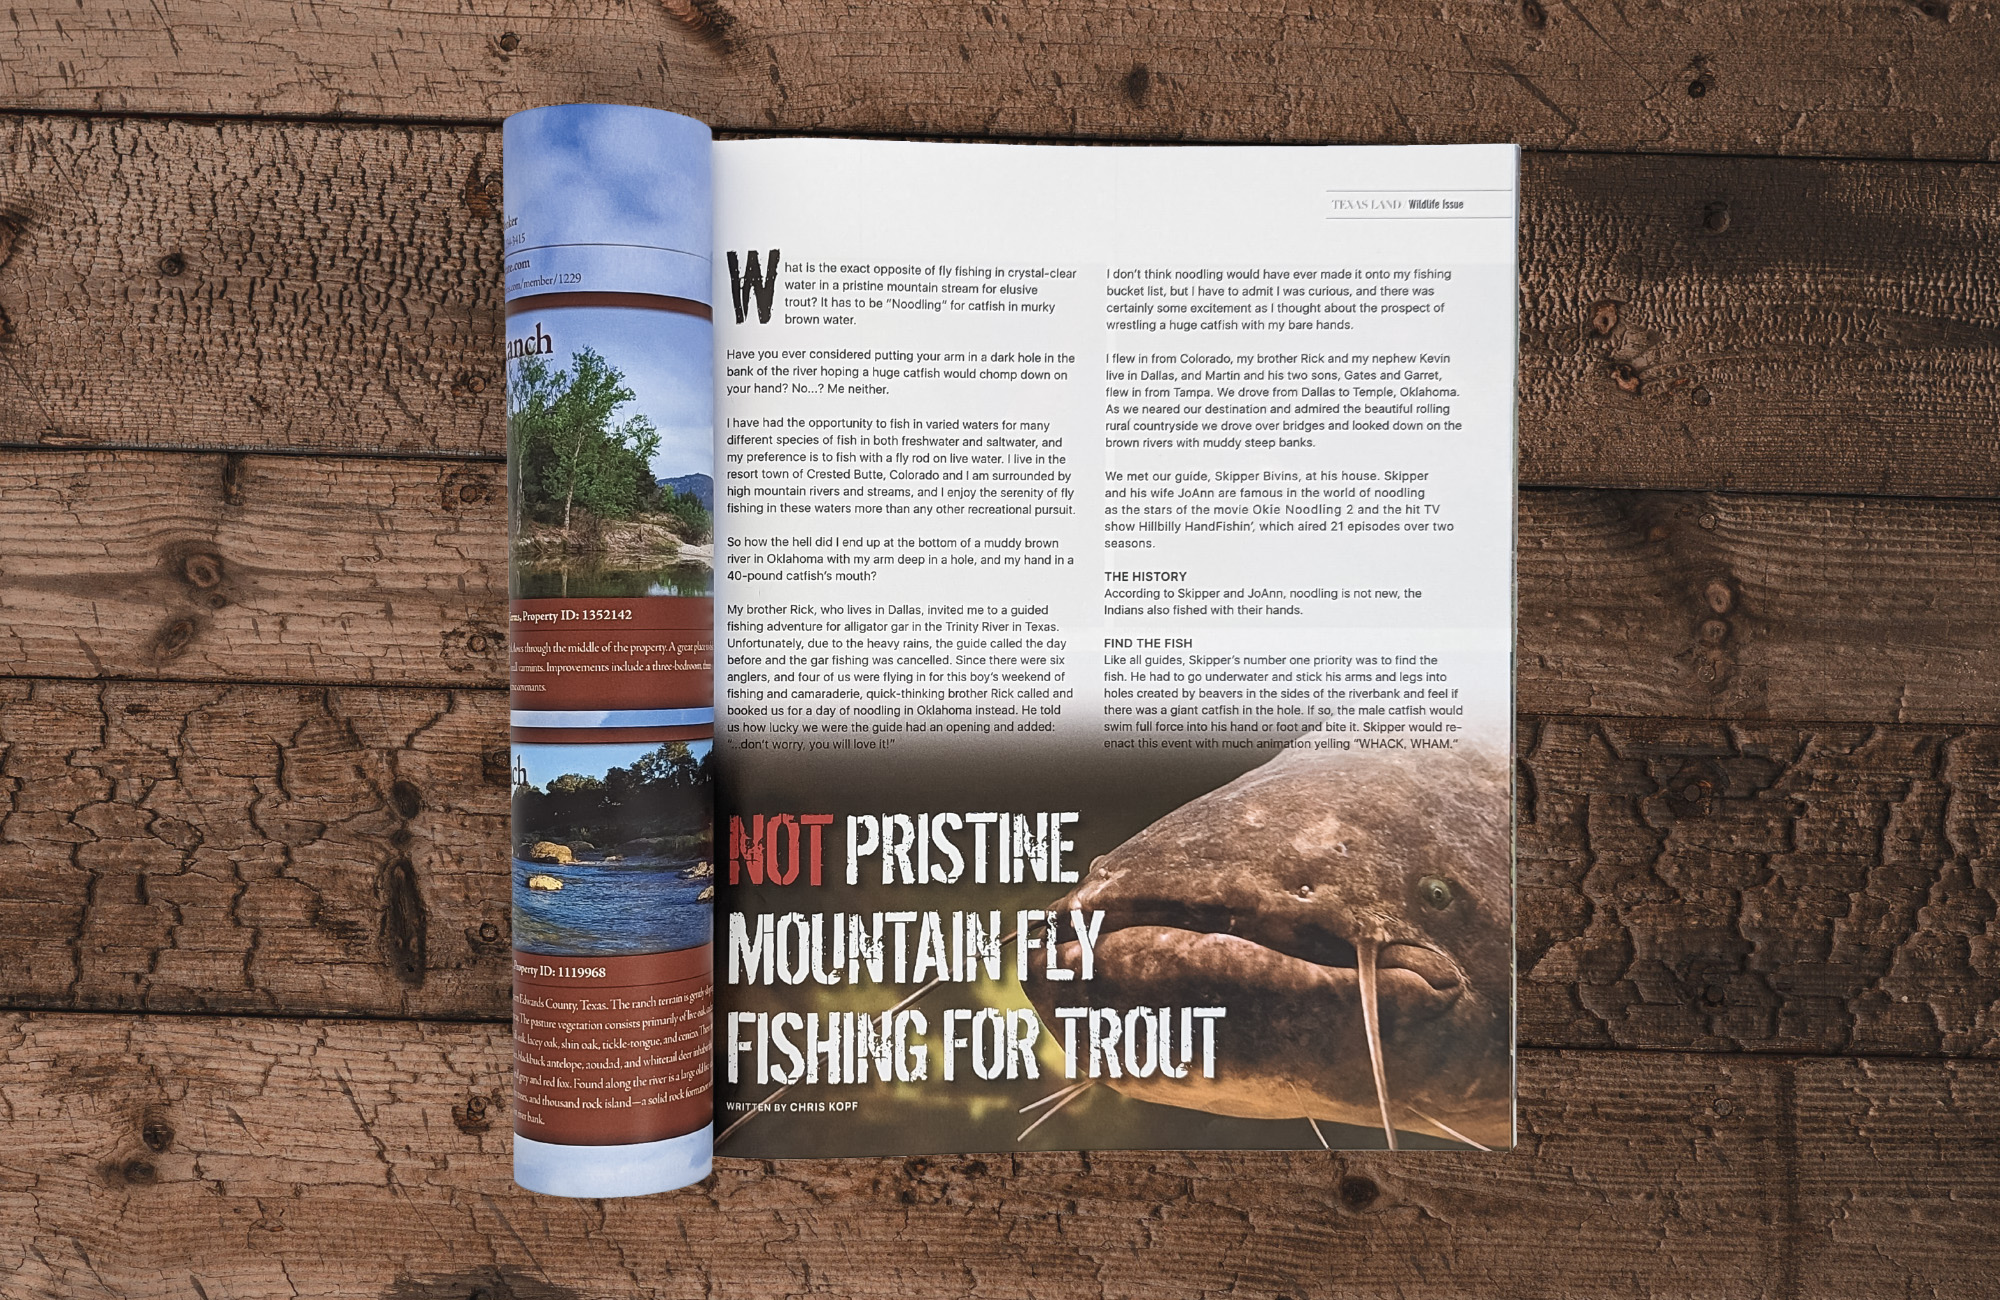 A magazine on a wooden surface. The left side of the magazine is rolled and tucked underneath. The right page is for an editorial titled Not Pristine Mountain Fly Fishing For Trout. Beside the title is an ominous picture of a catfish.